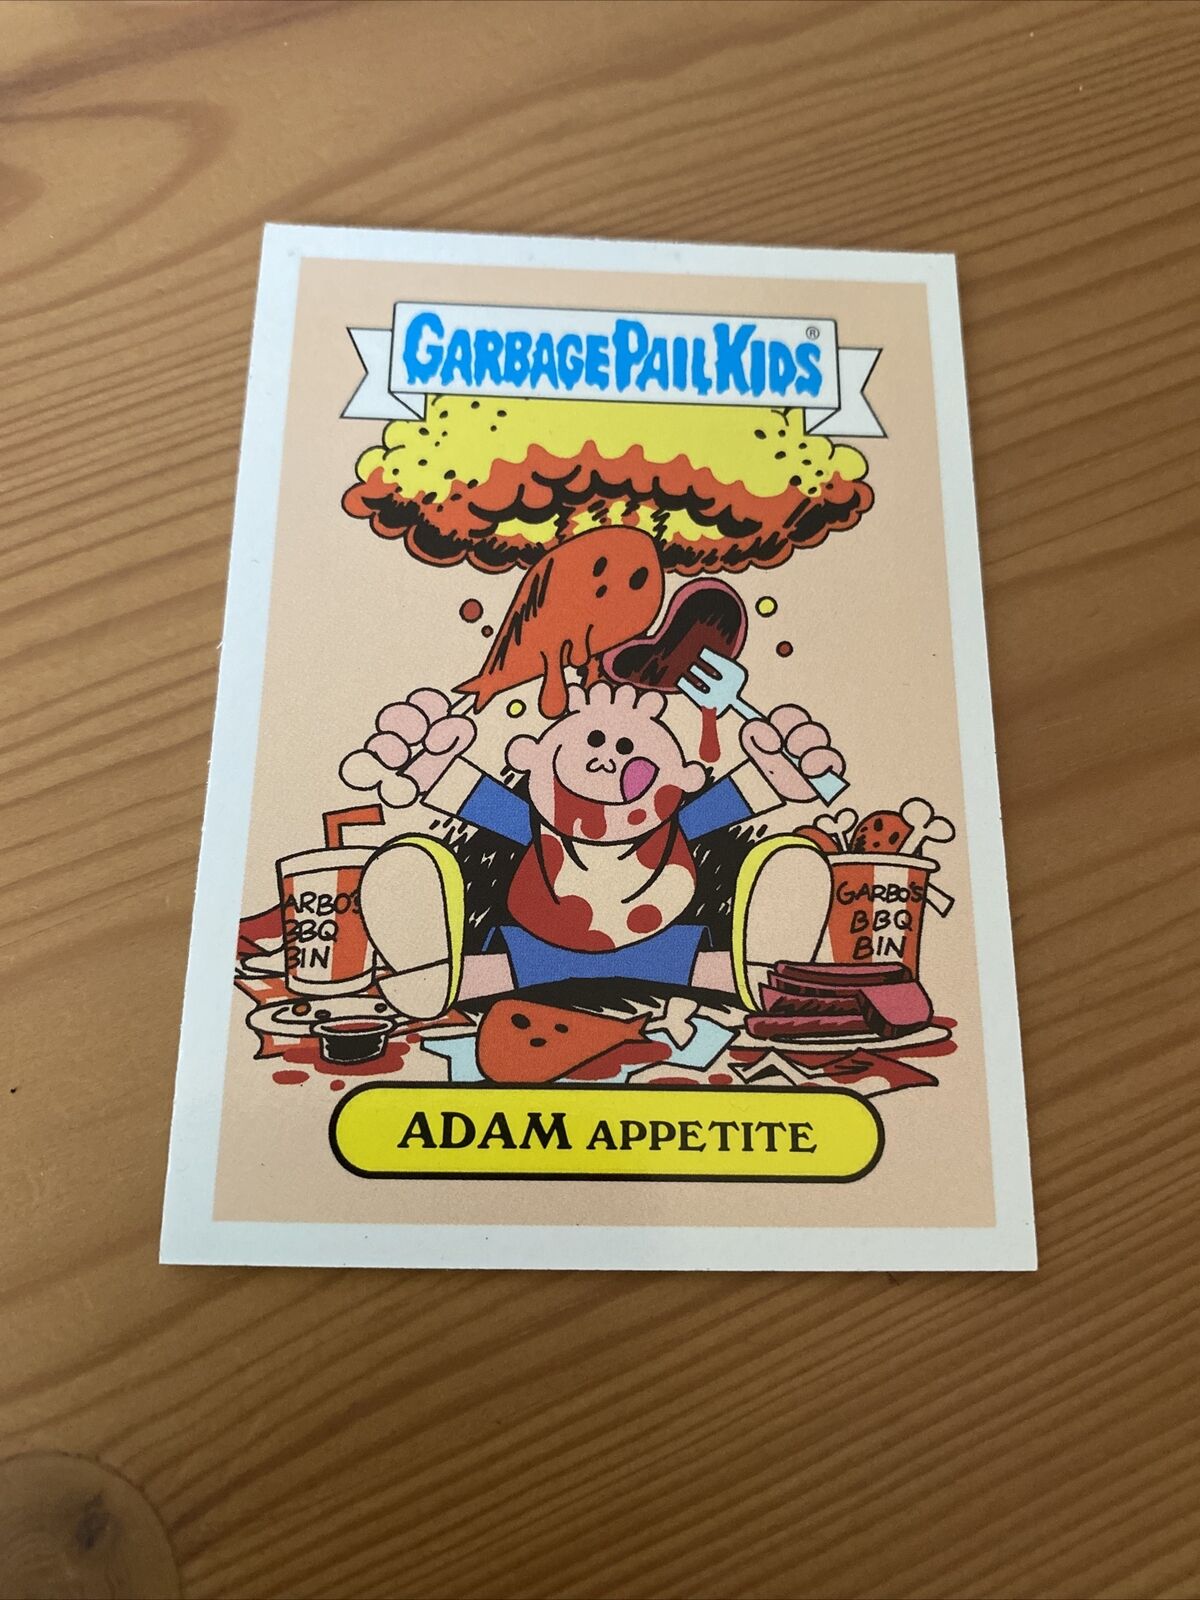 *USED NO REDEMPTION VALUE* GARBAGE PAIL KIDS FOOD FIGHT ADAM BOMB APPETITE CARD